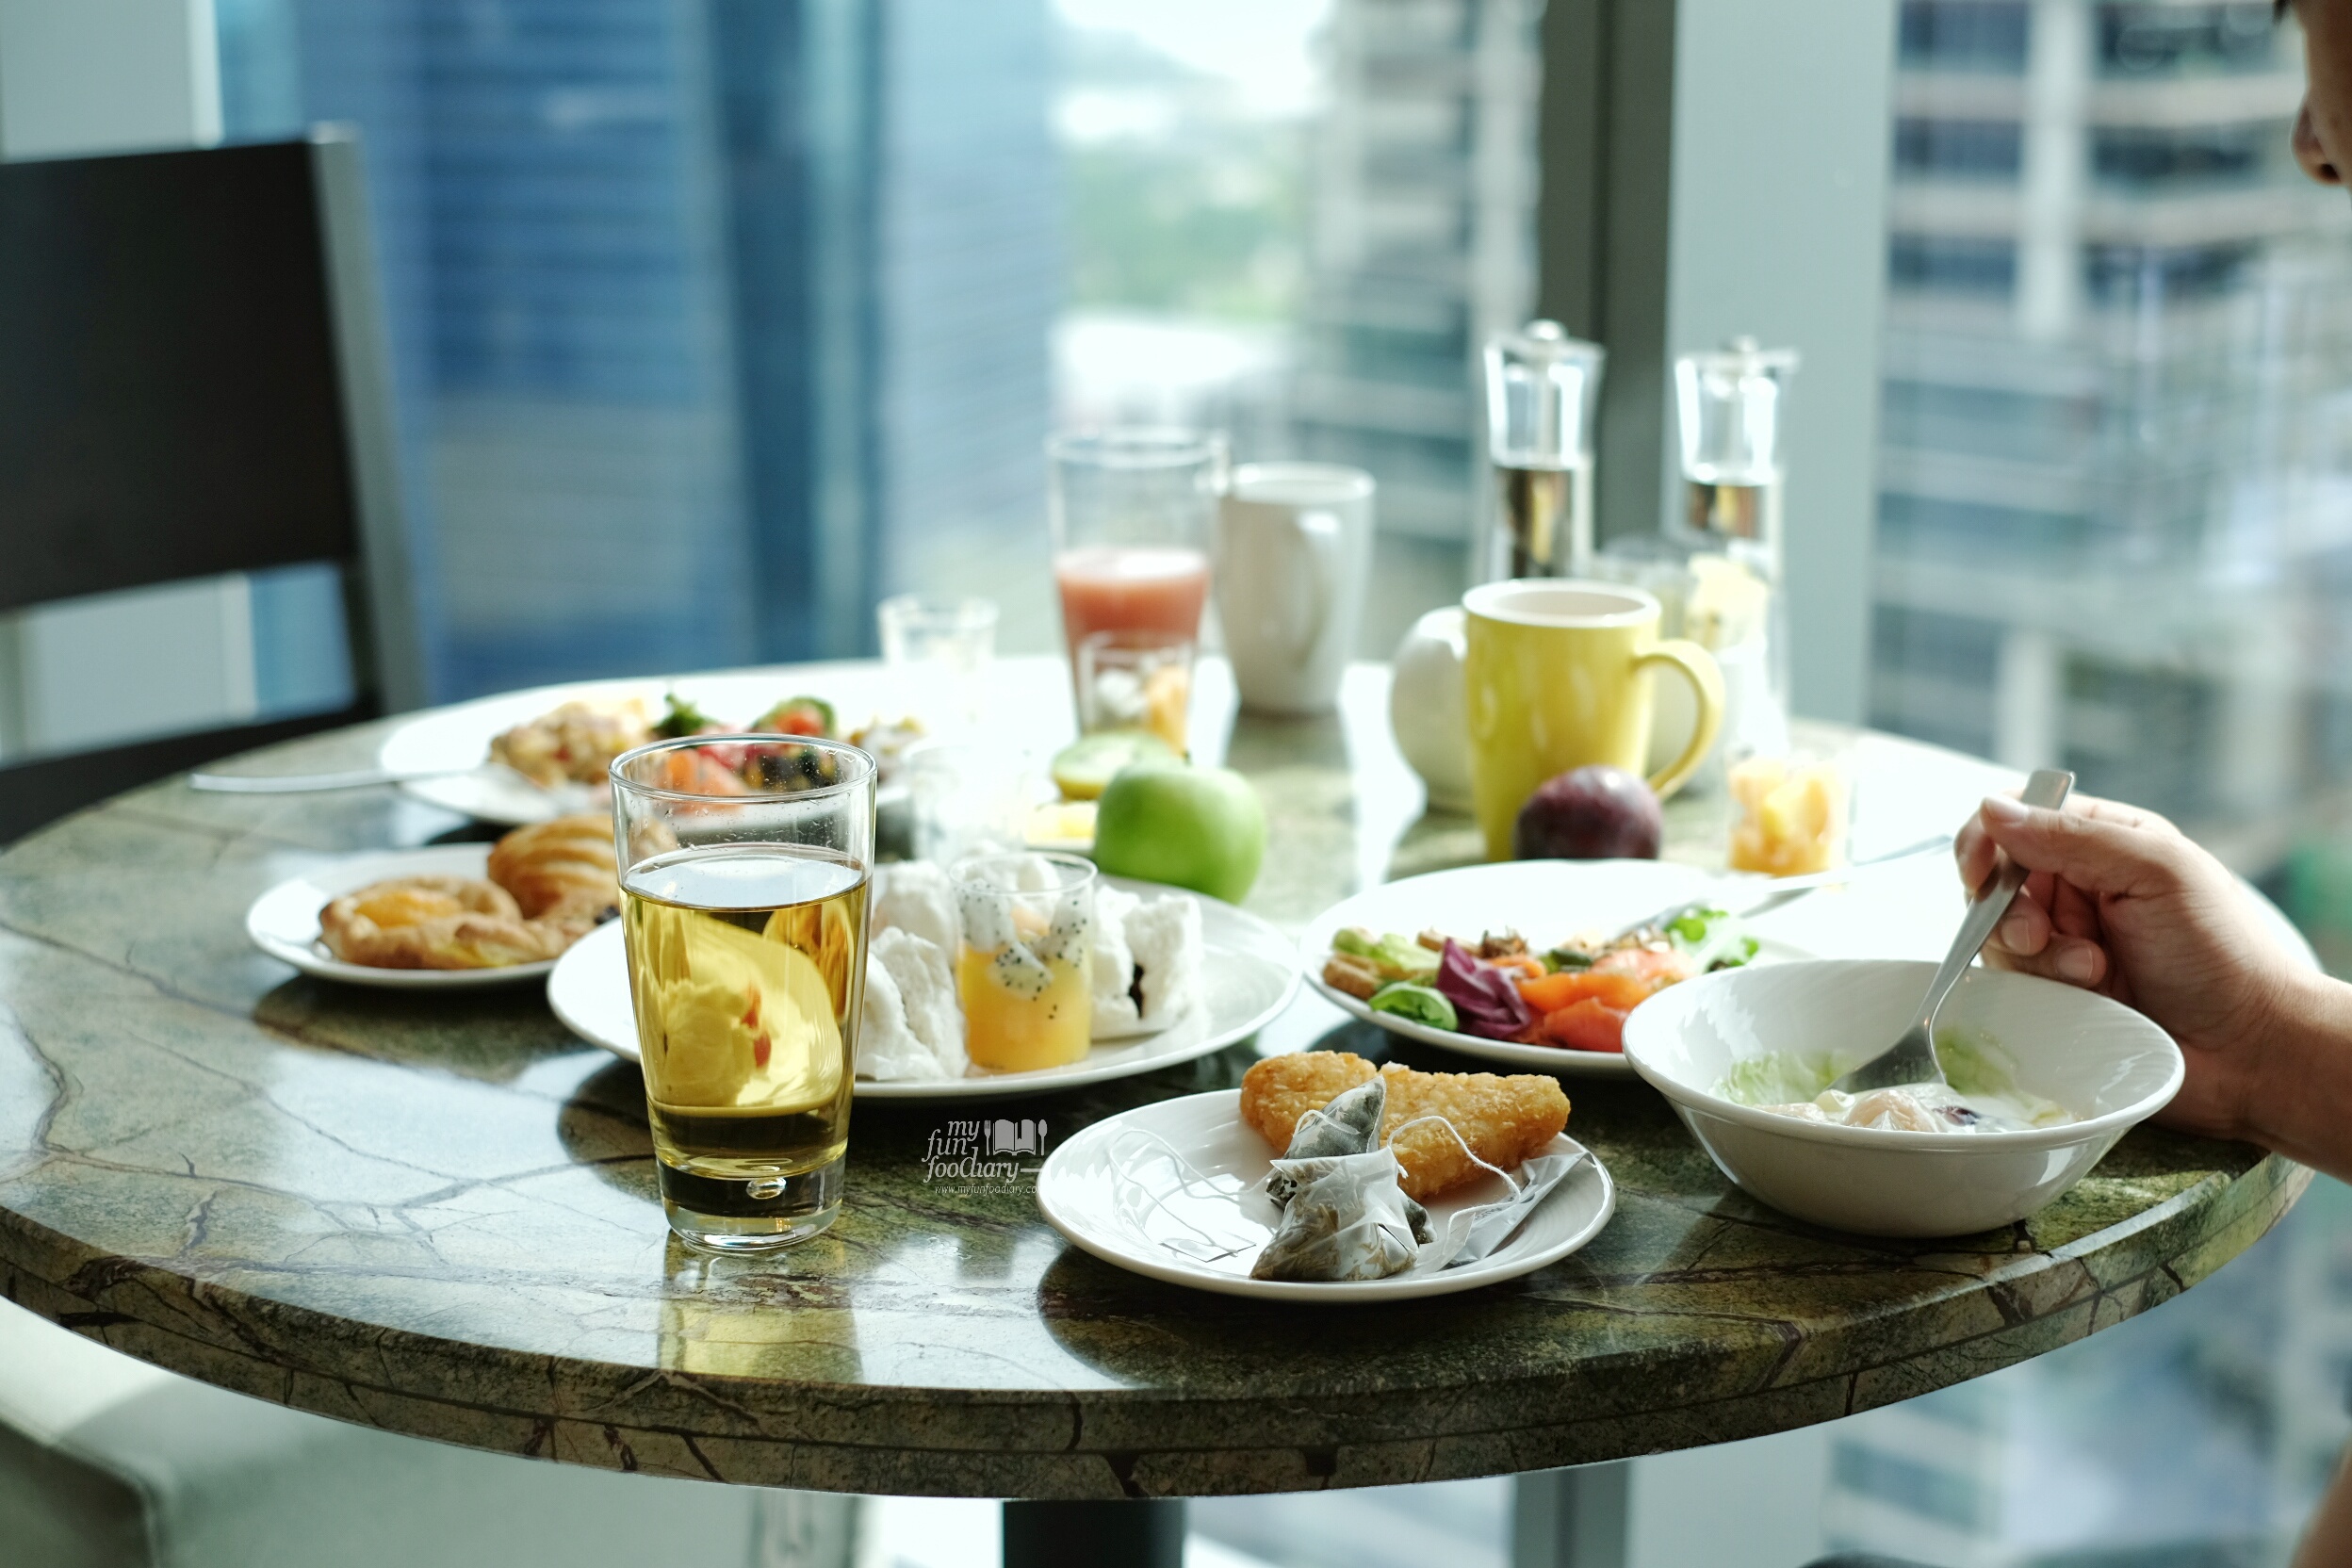 Eat Well at Westin Singapore for buffet breakfast by Myfunfoodiary